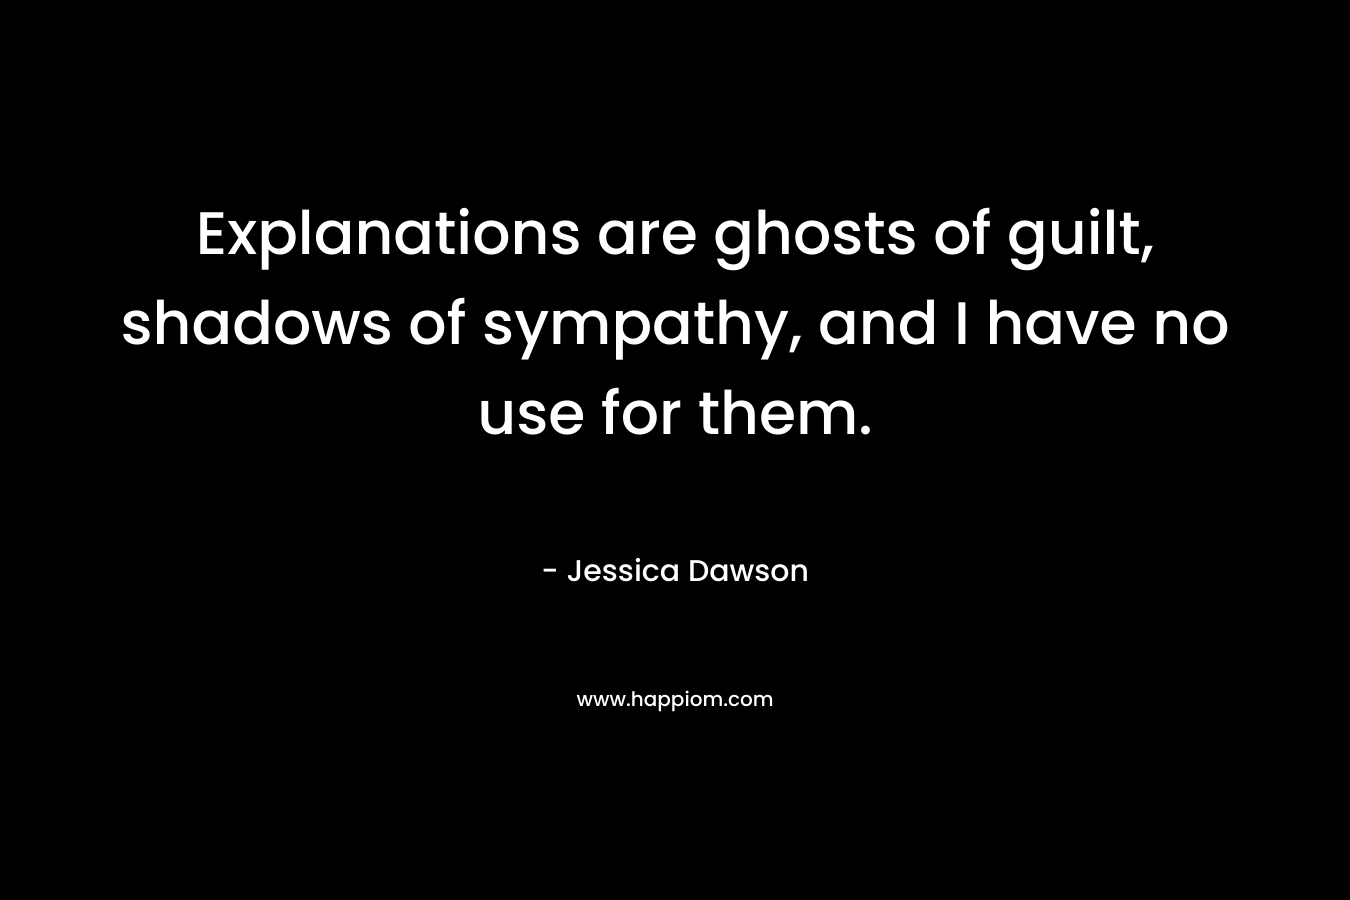 Explanations are ghosts of guilt, shadows of sympathy, and I have no use for them. – Jessica Dawson